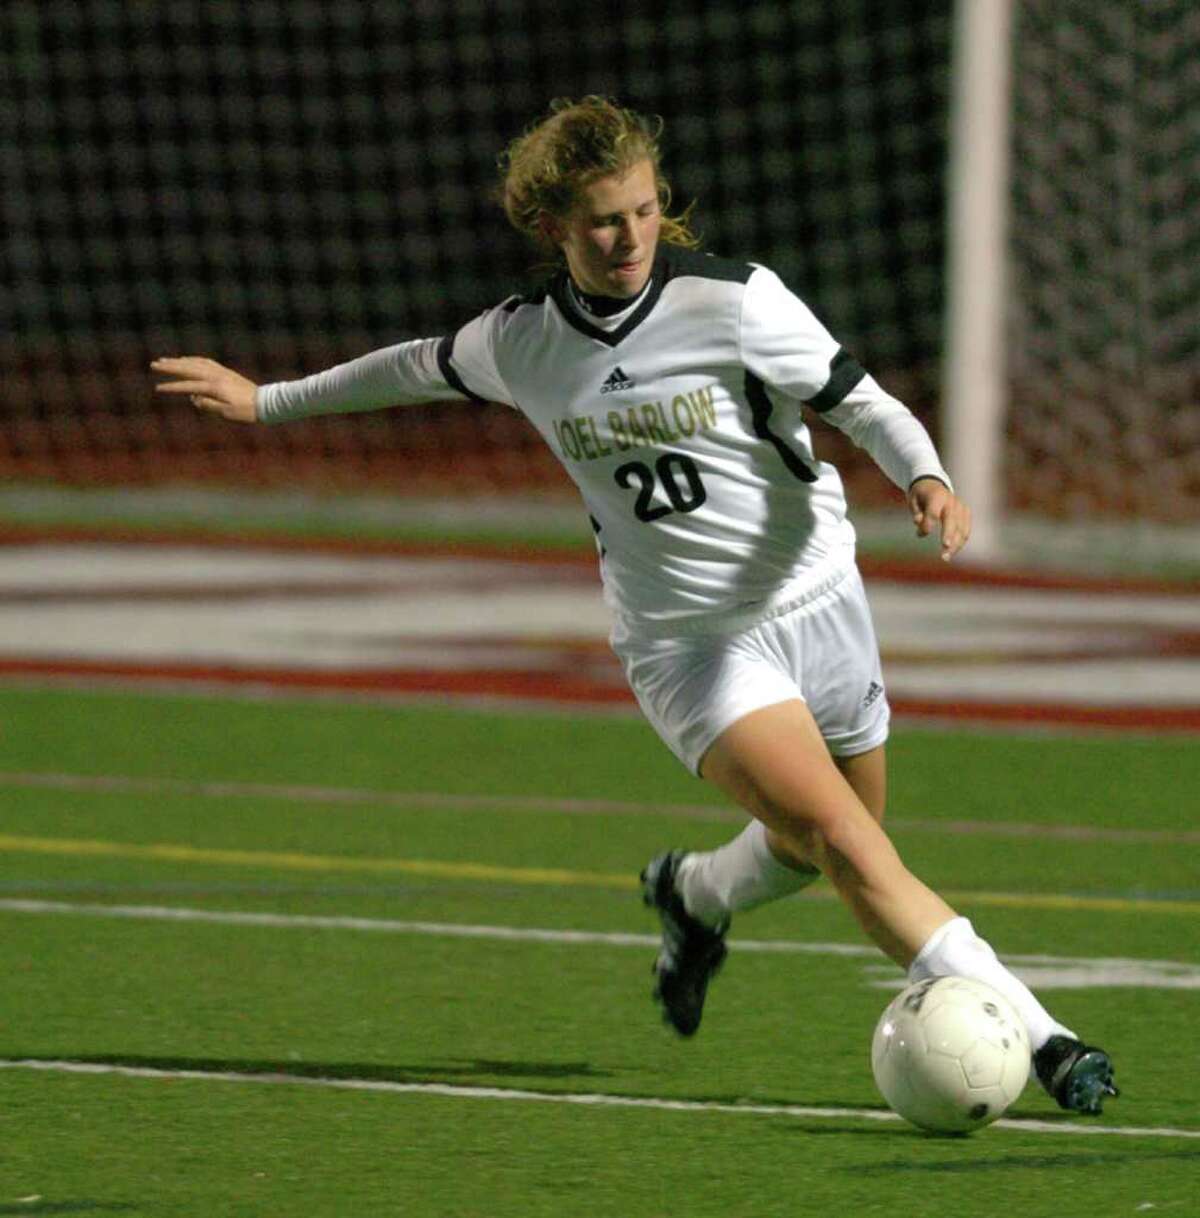 Joel Barlow's 20, Kelly Haines, makes a pass during the girls soccer game against Bunnell, at Southbury High School Nov. 4, 2010.